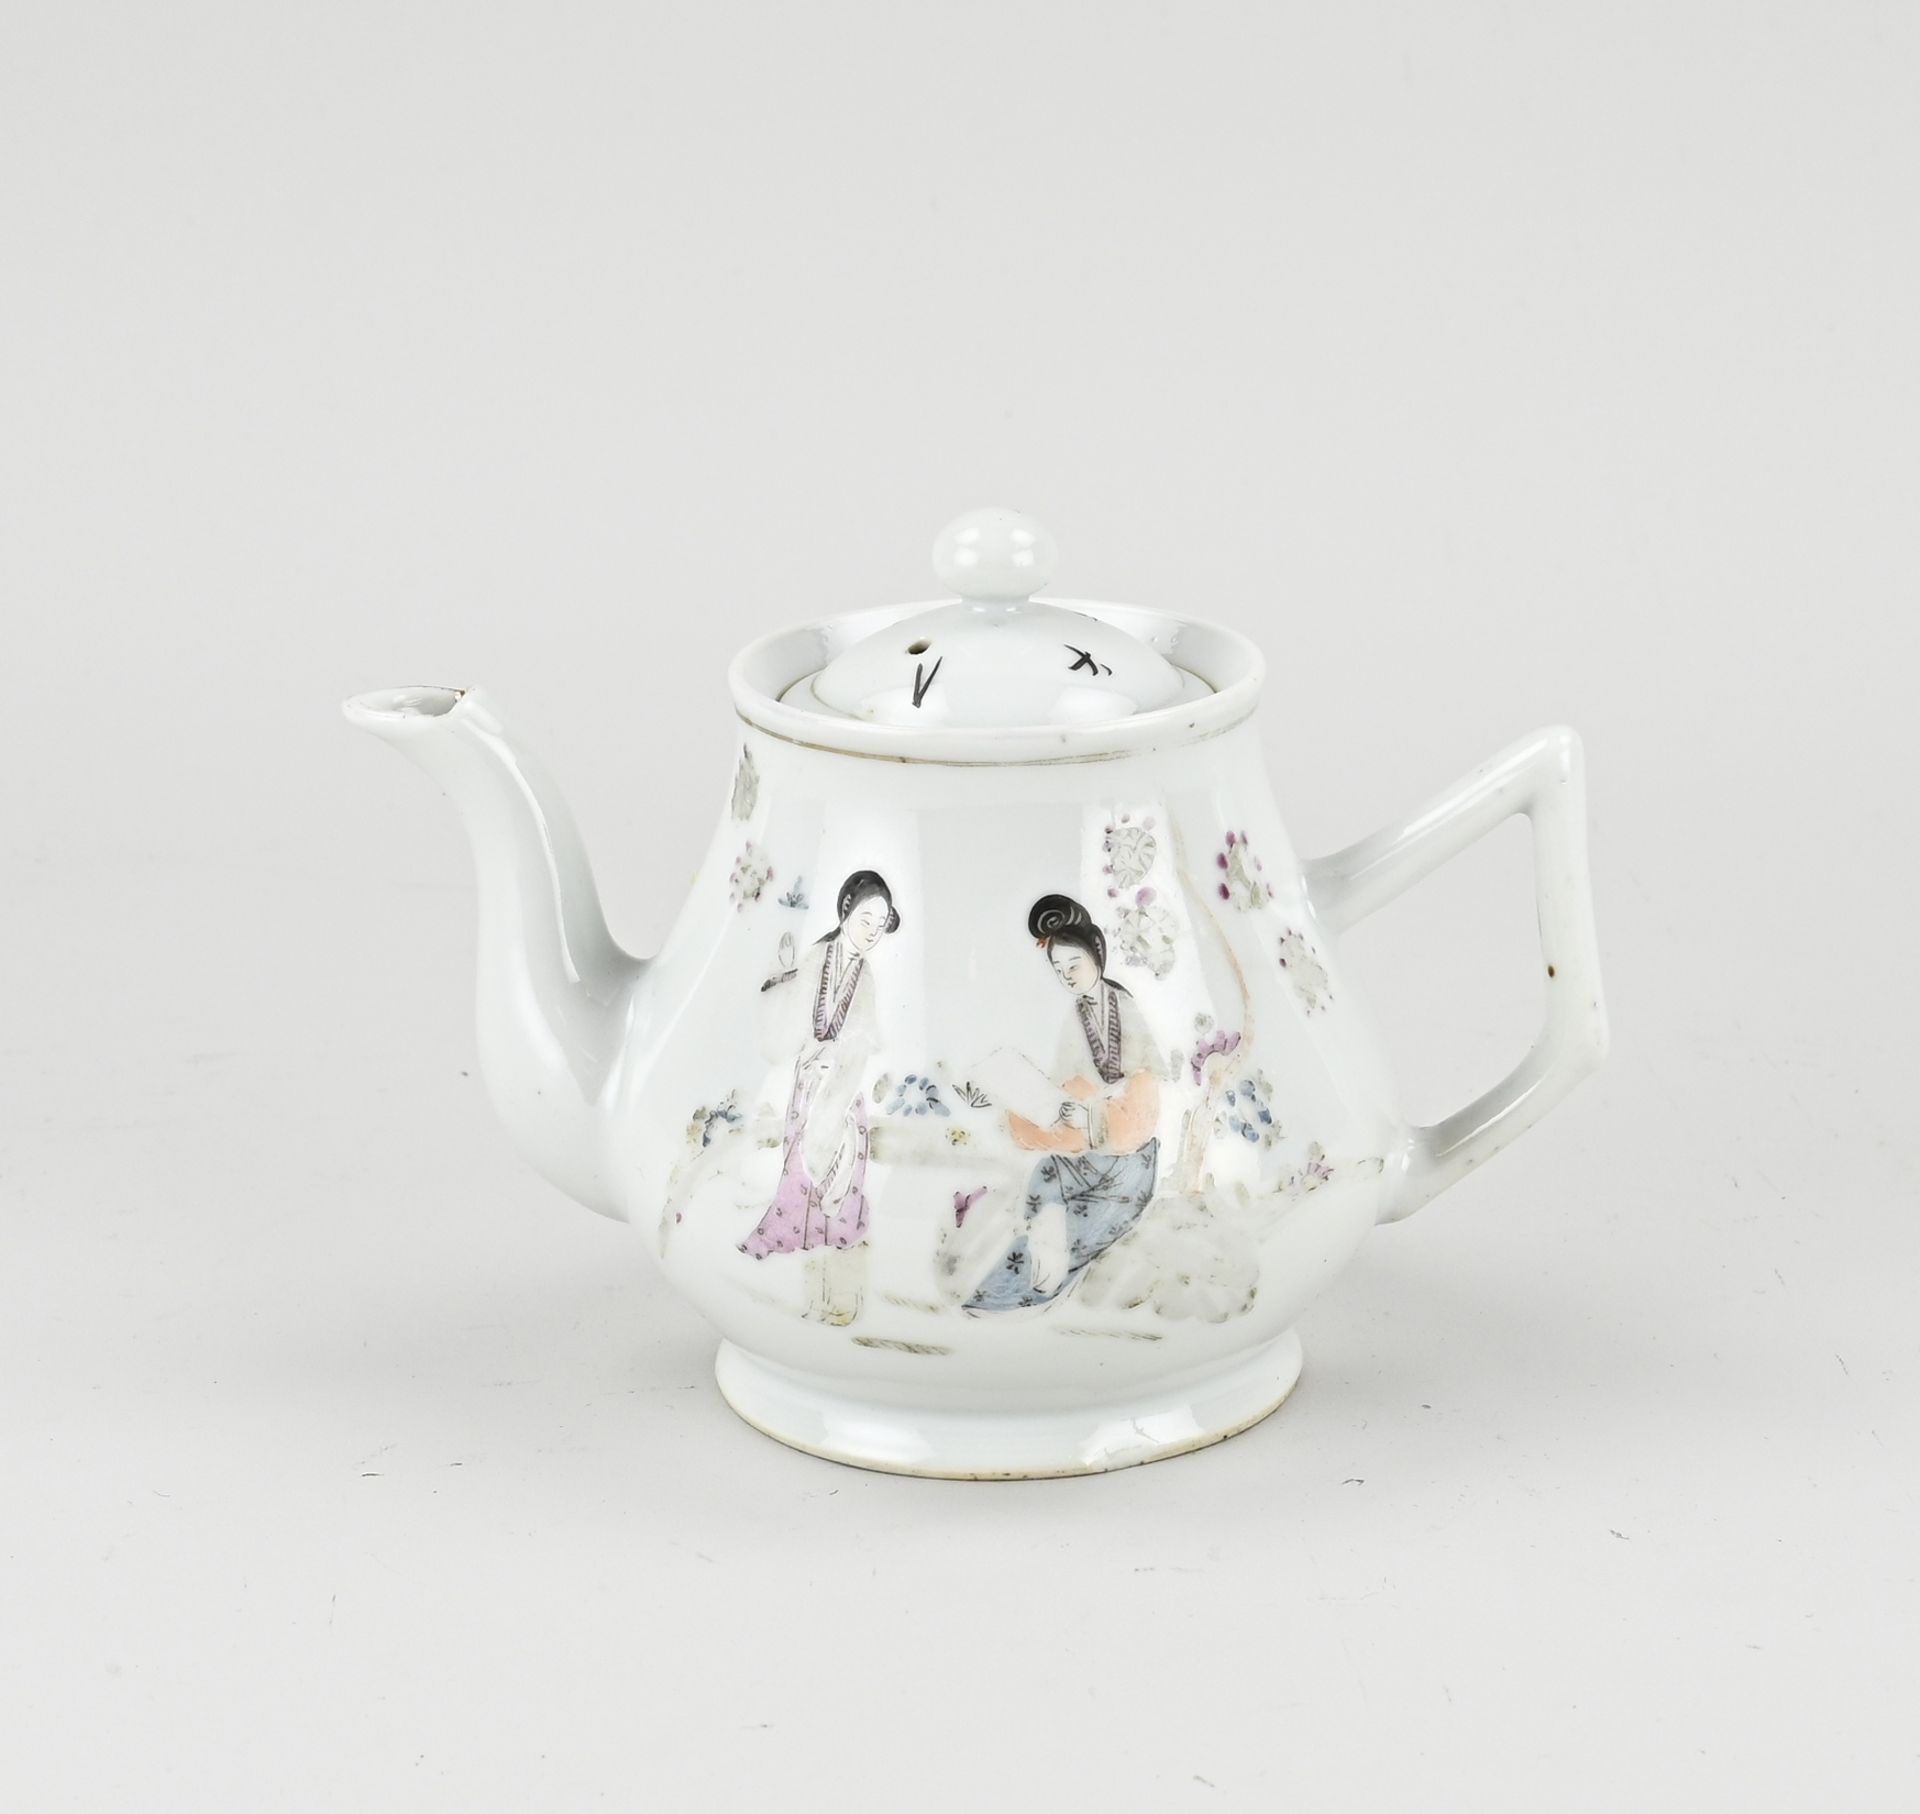 Antique Chinese teapot, 1920